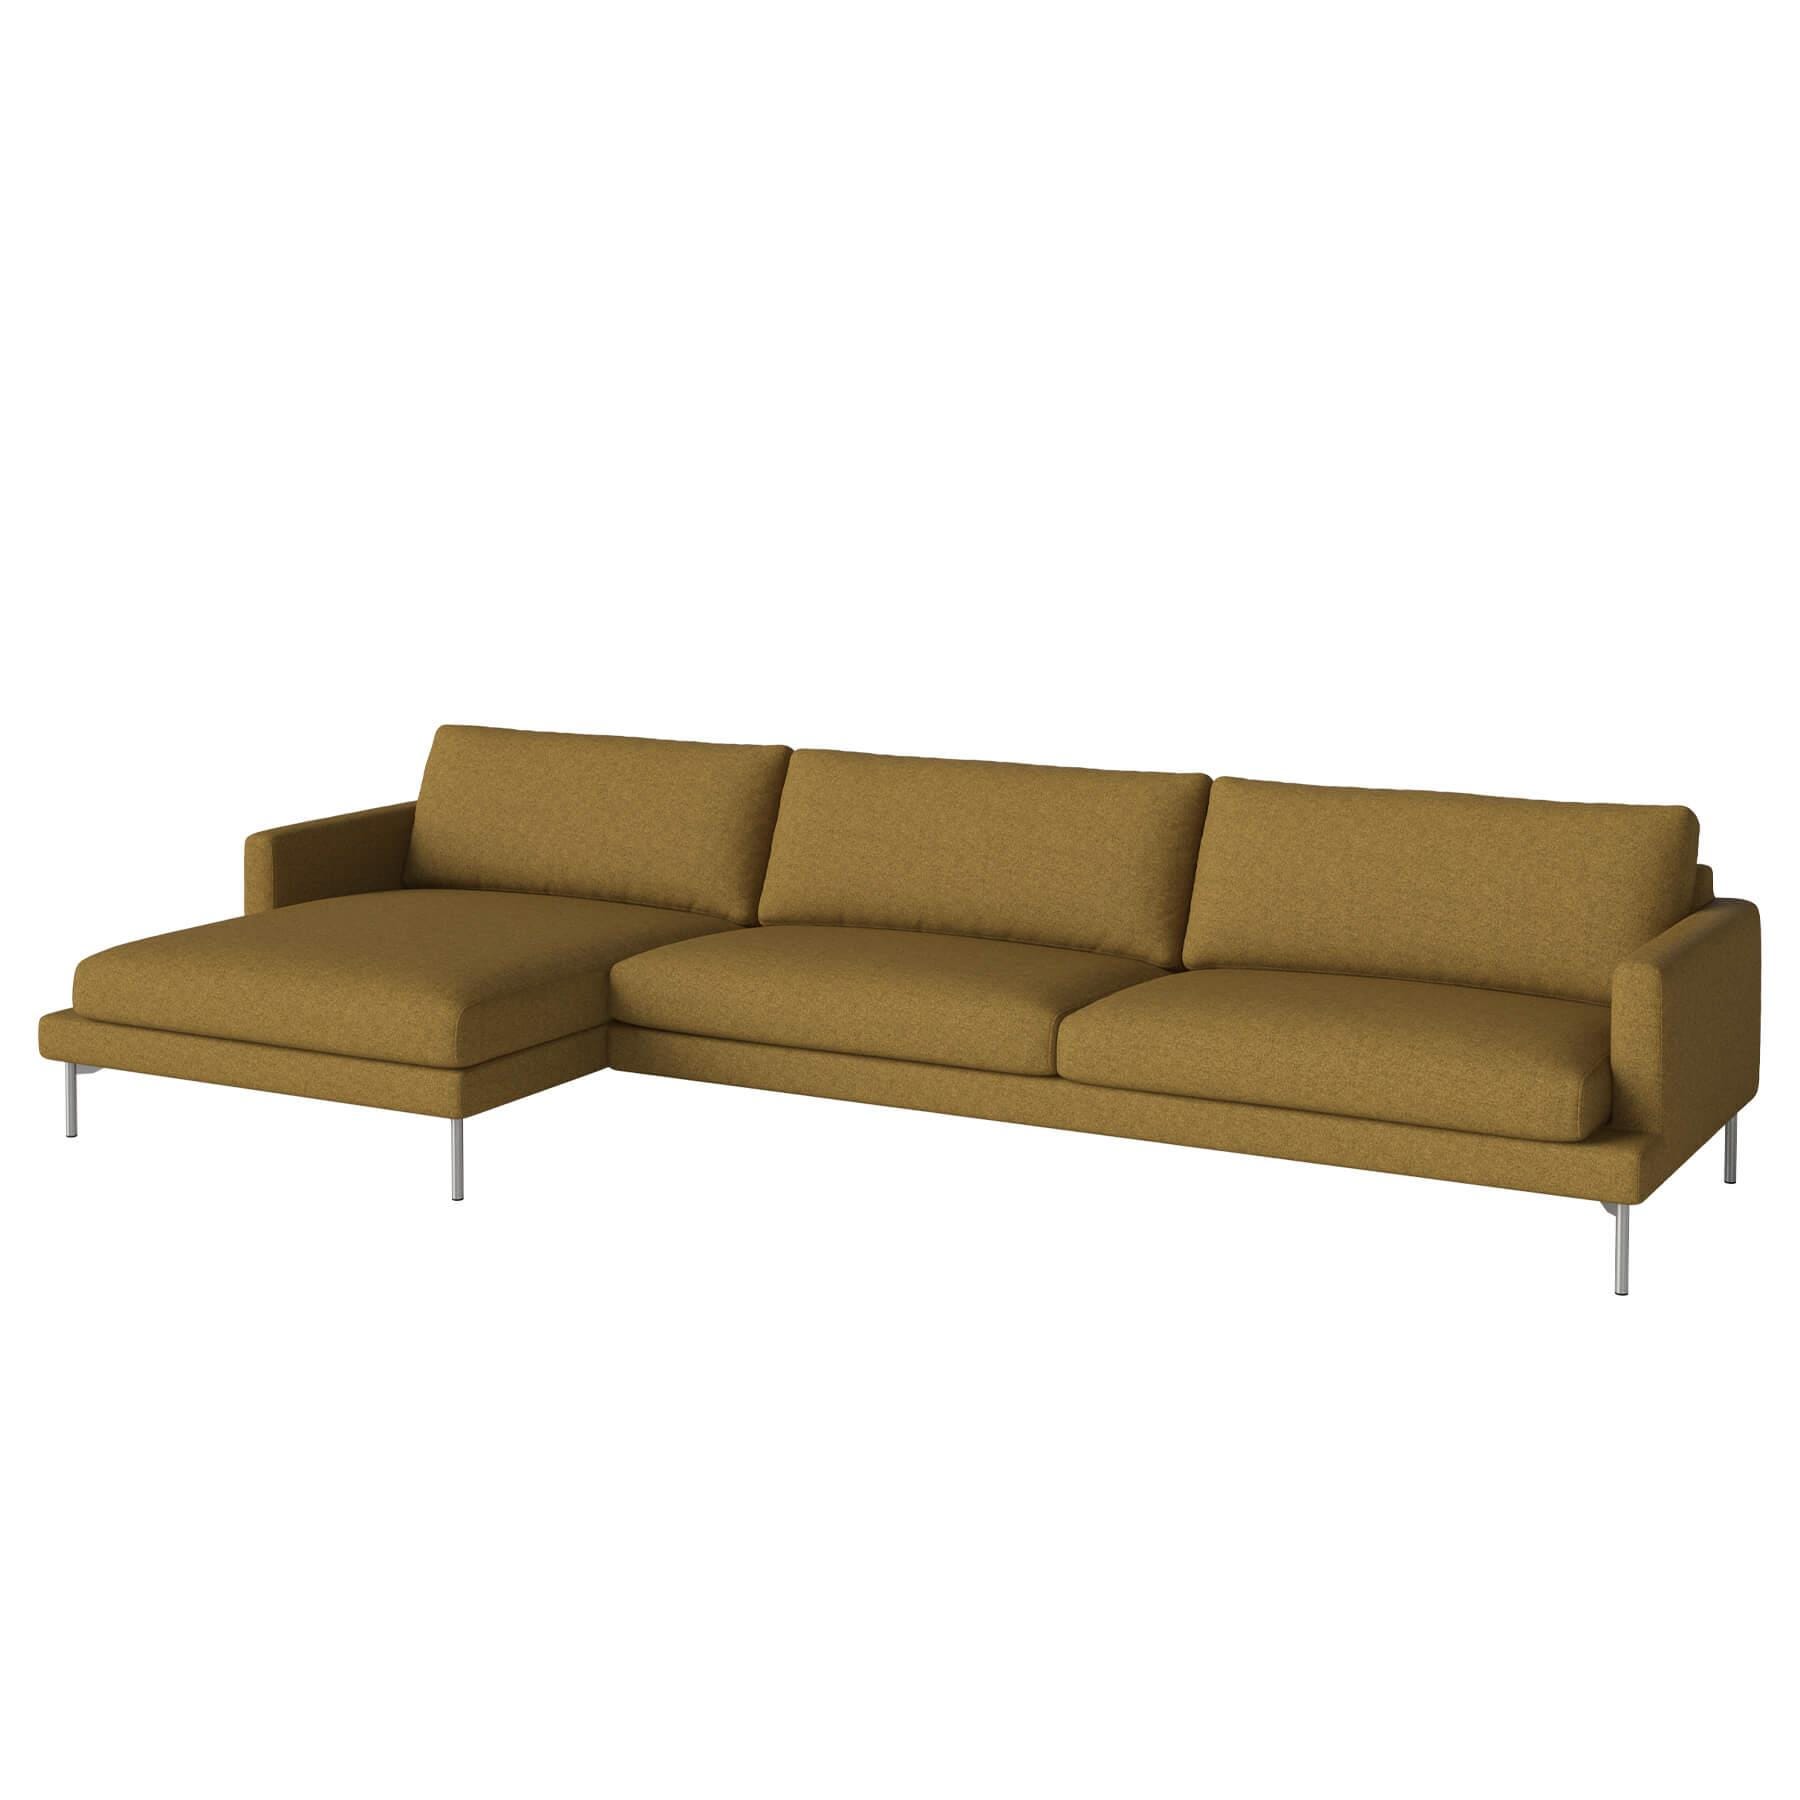 Bolia Veneda Sofa 45 Seater Sofa With Chaise Longue Brushed Steel Qual Curry Left Brown Designer Furniture From Holloways Of Ludlow